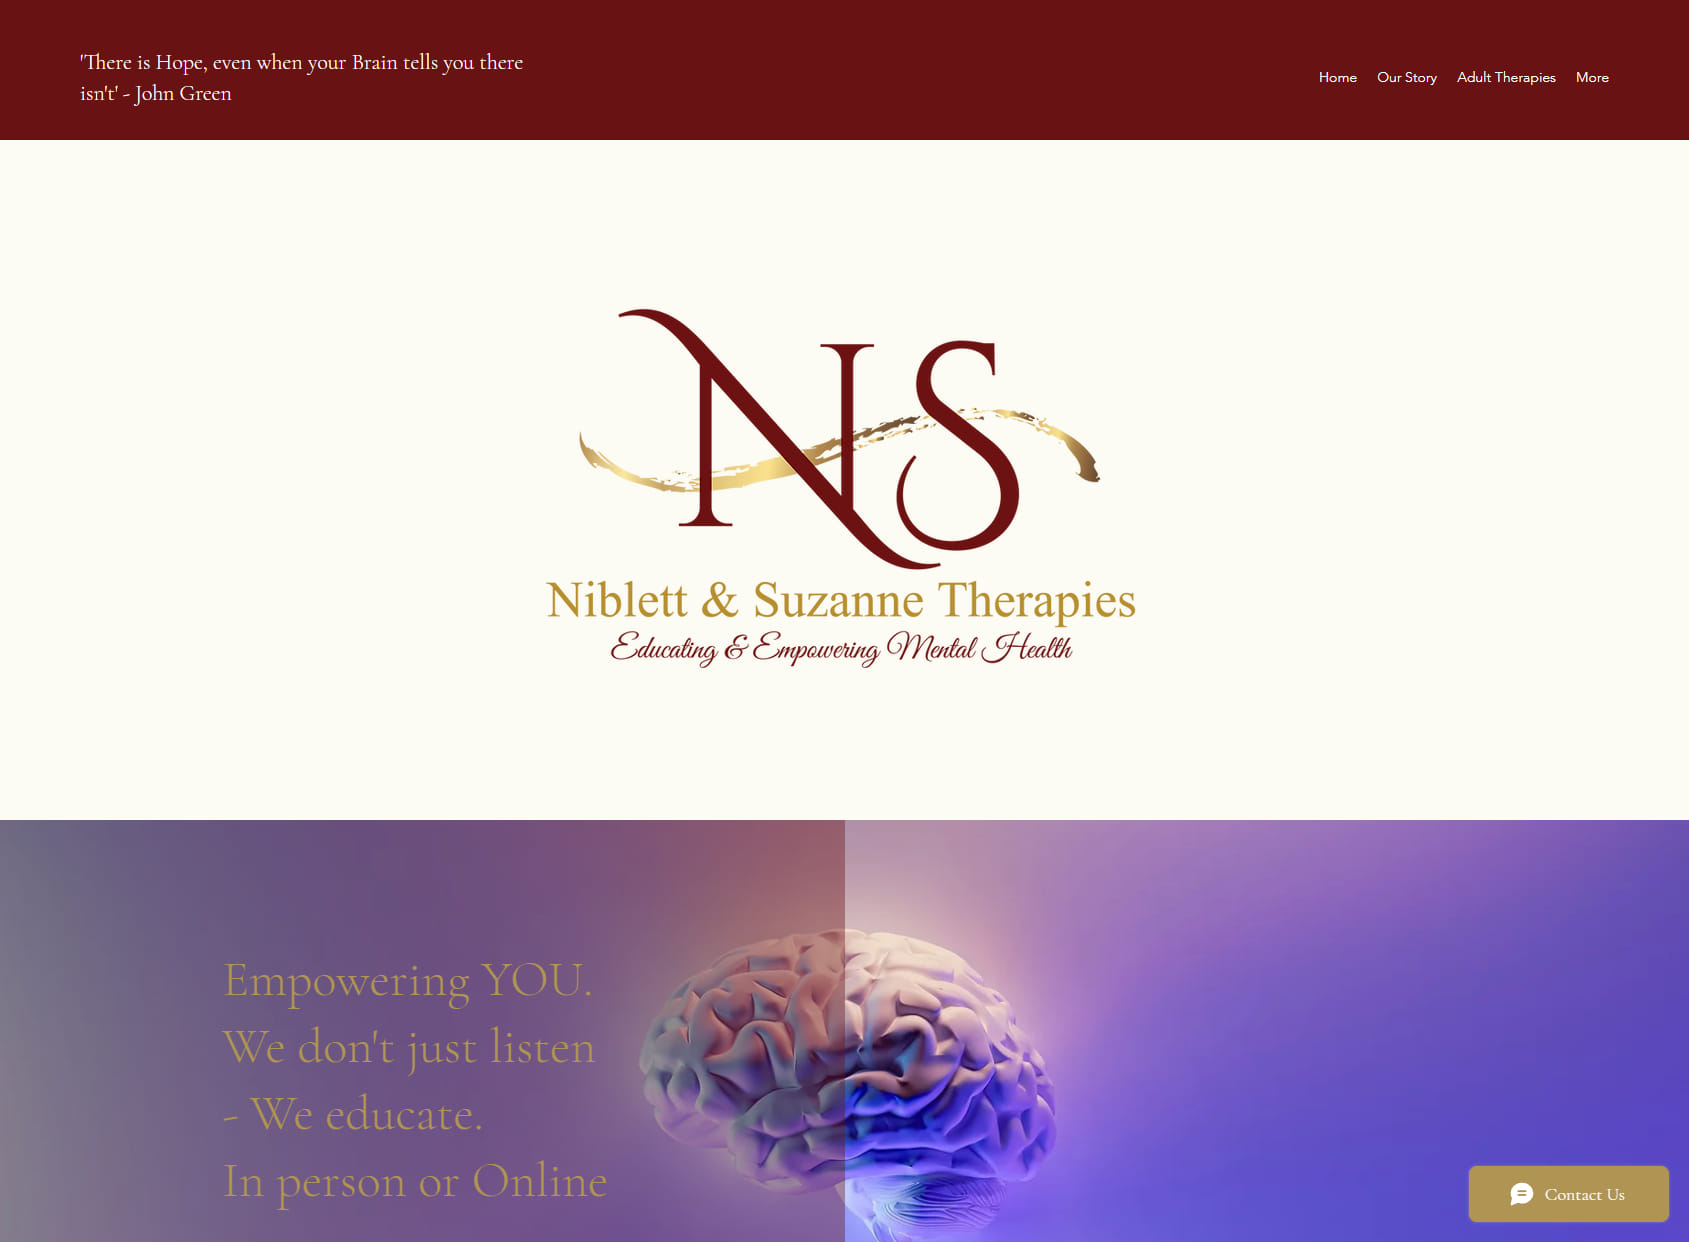 Niblett & Suzanne Therapies